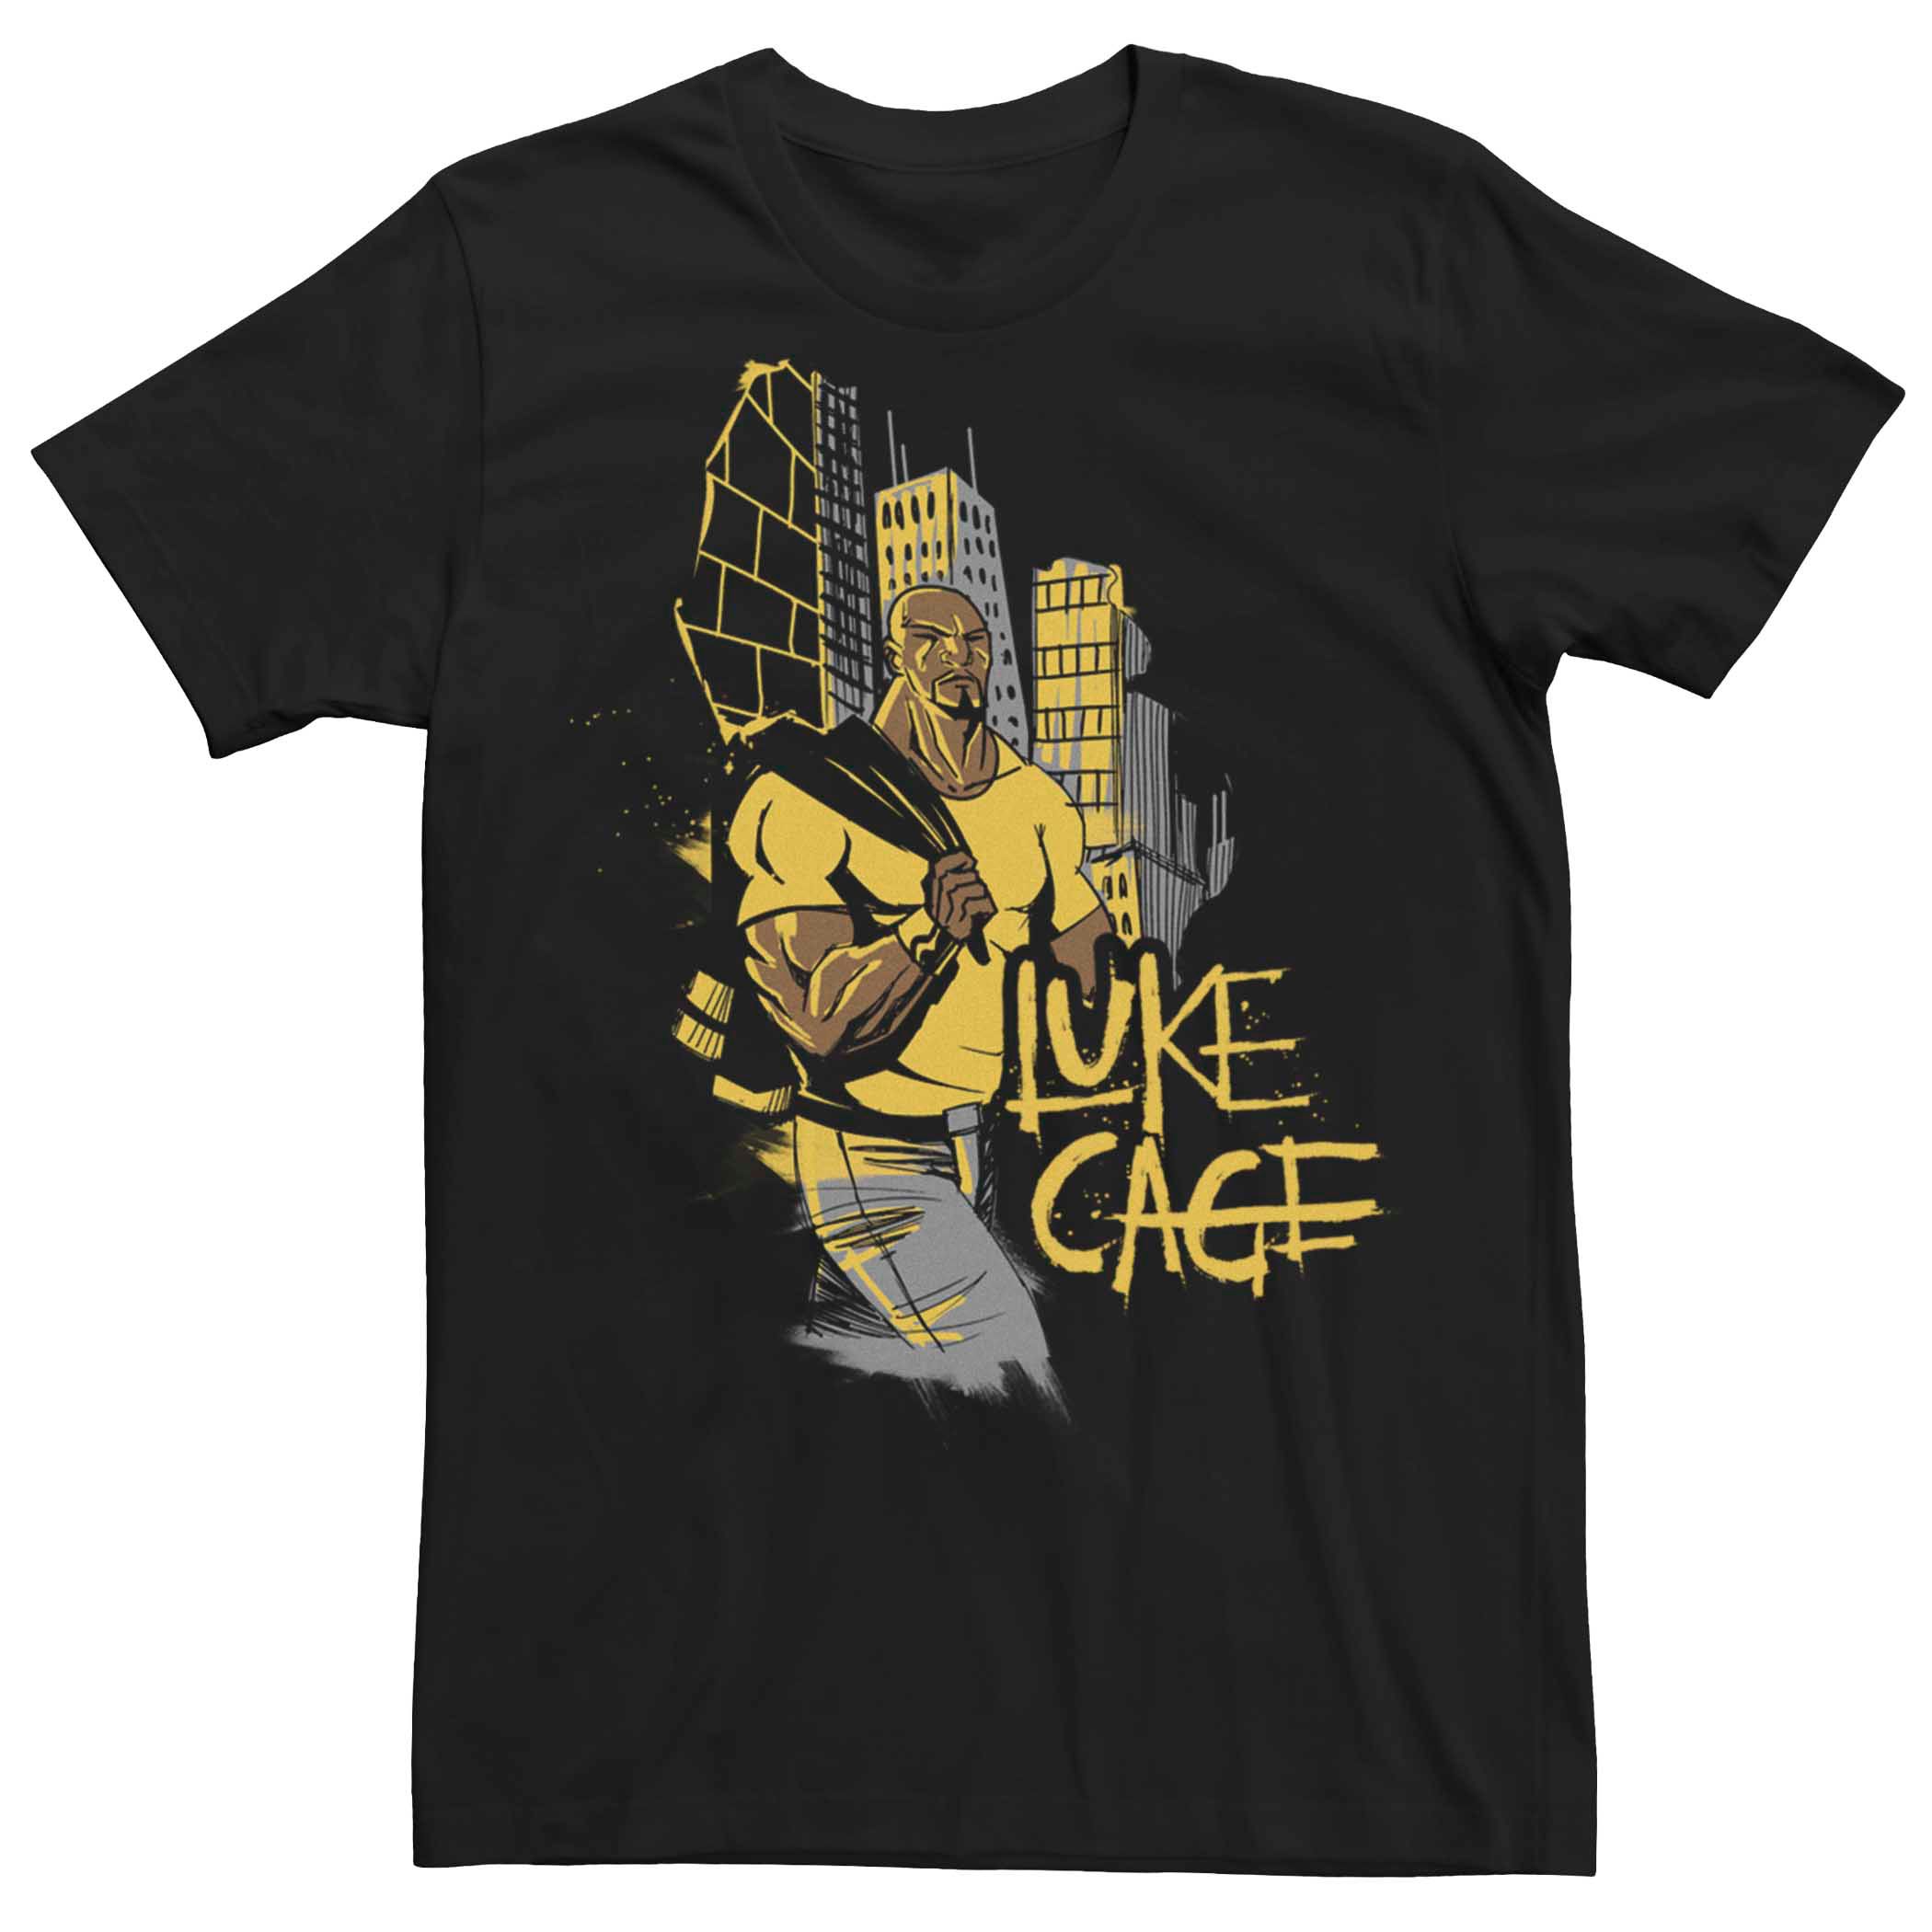 Мужская футболка Marvel Luke Cage Looking Cool Licensed Character мужская футболка marvel luke cage hero for class president licensed character